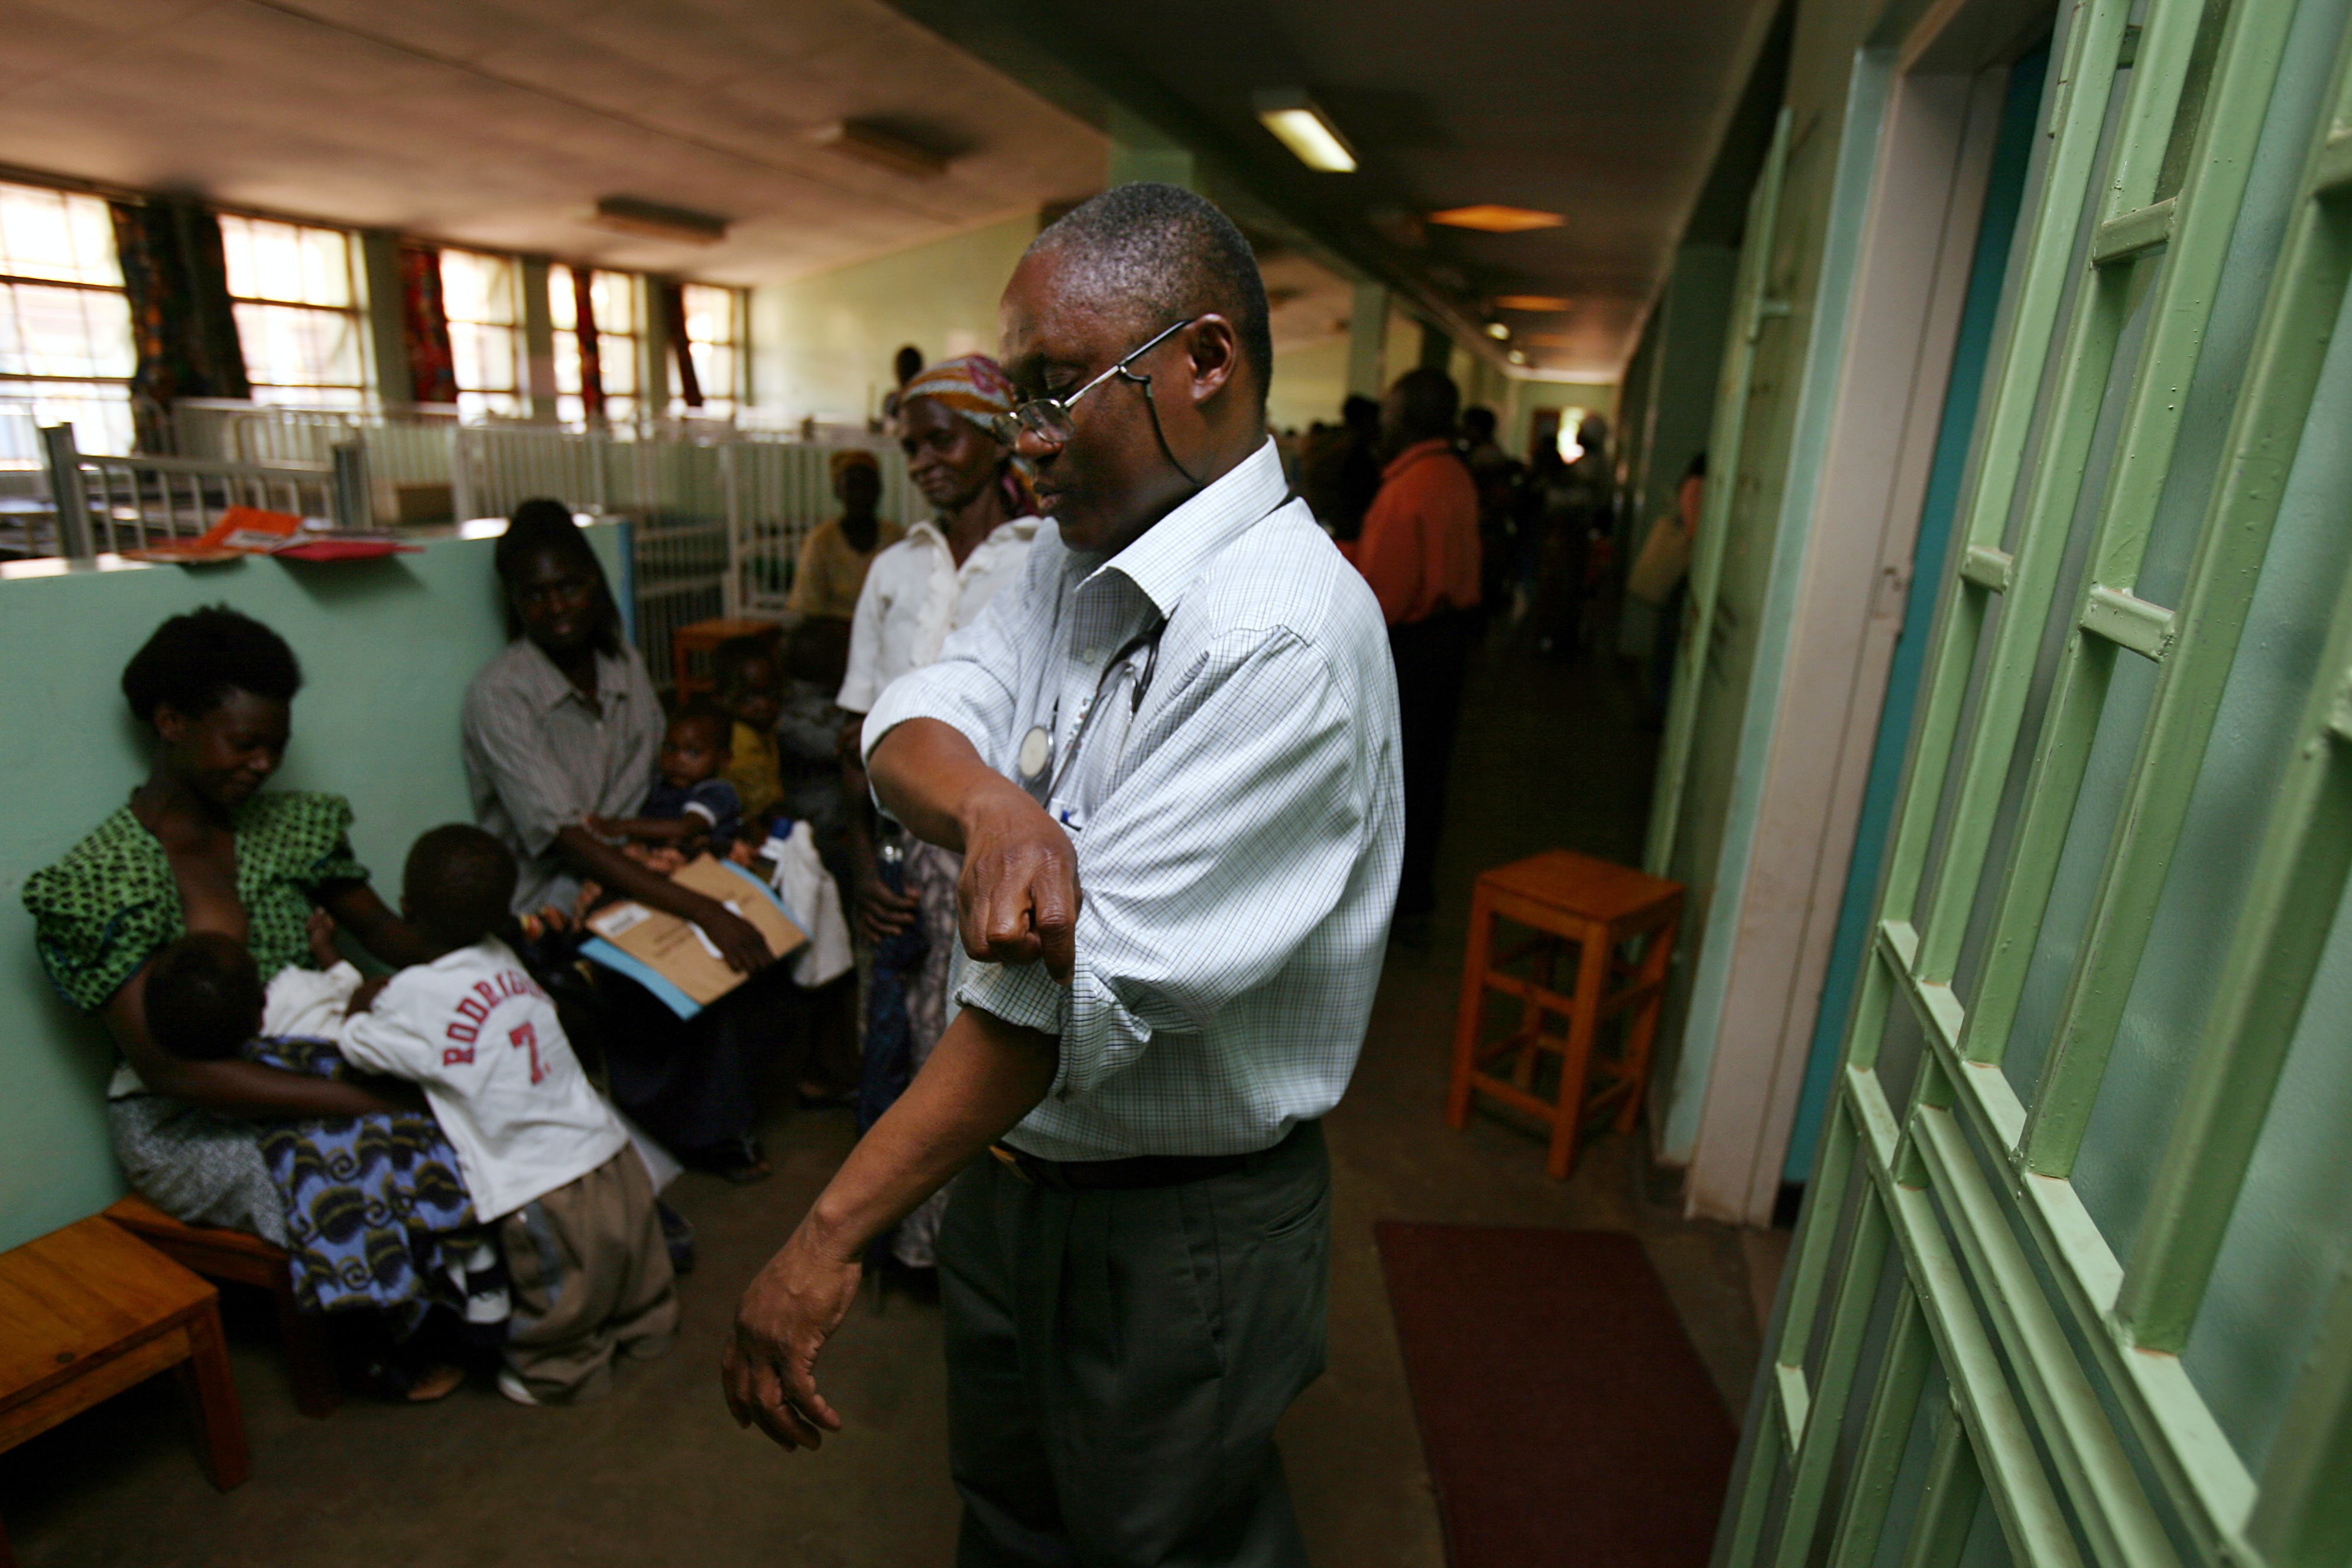 Doctor in collared shirt rolling up sleeves preparing to see HIV patients.